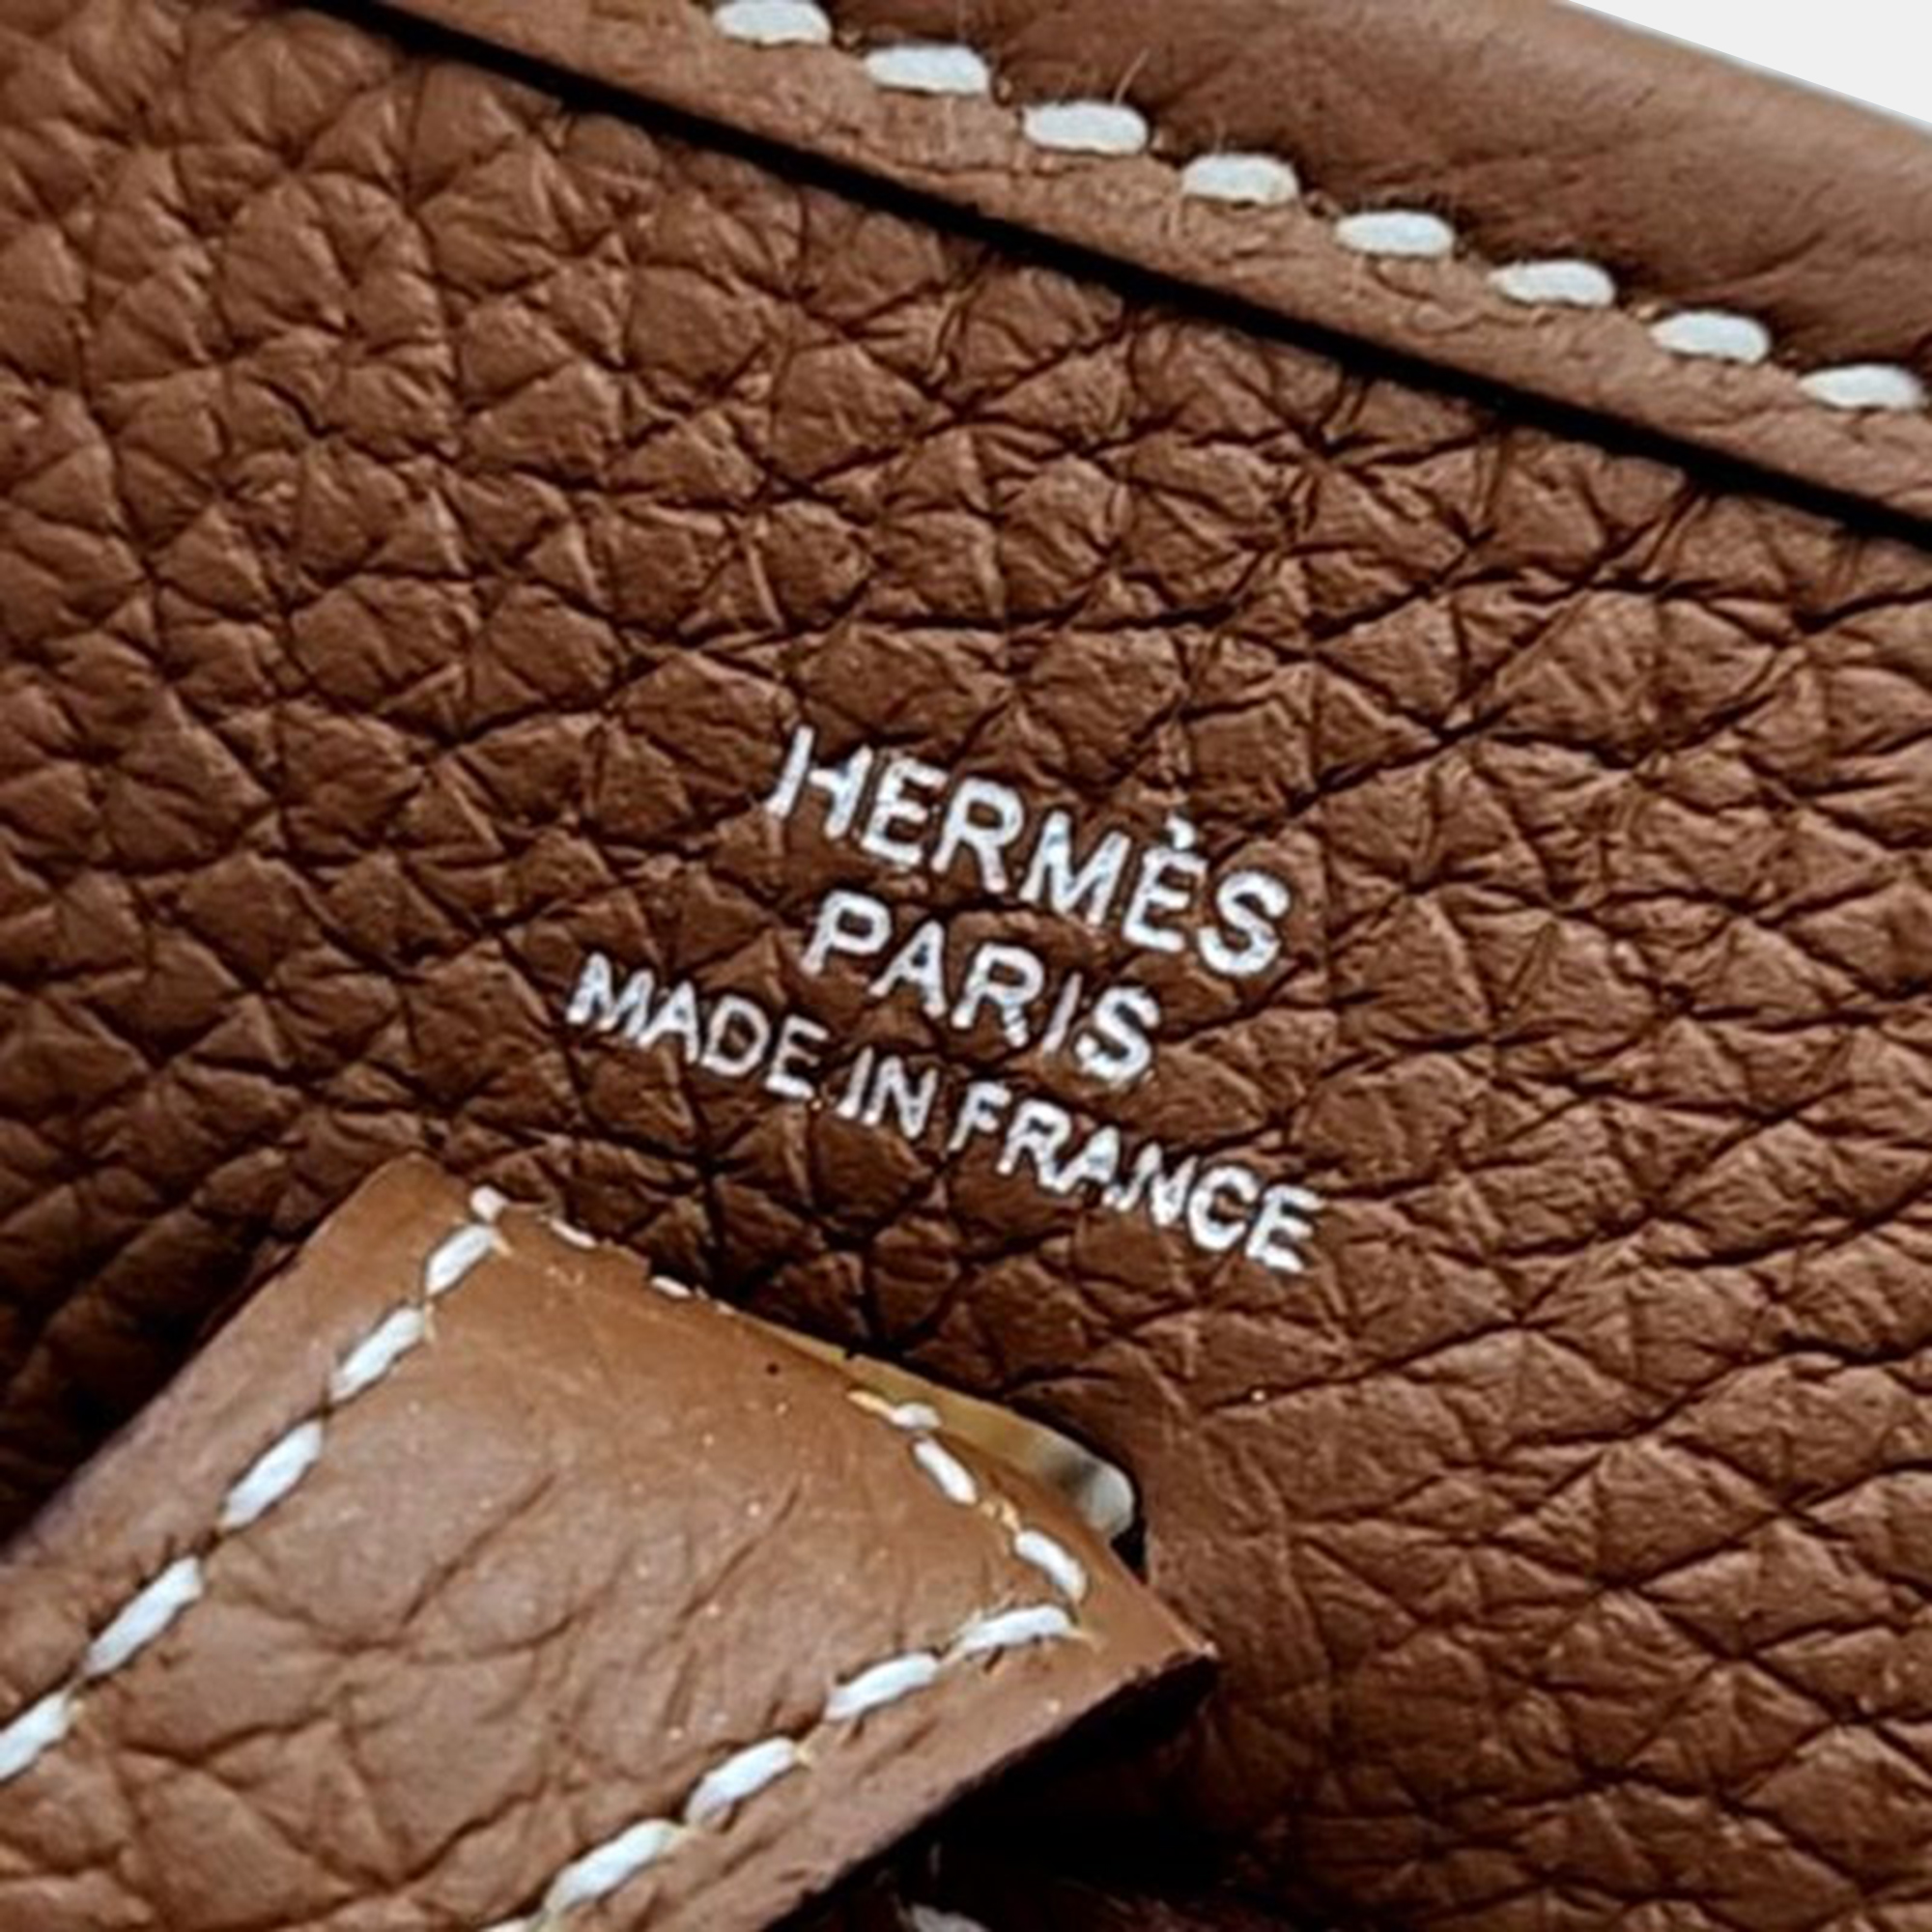 Hermes Brown Leather Evelyn 16 (B)